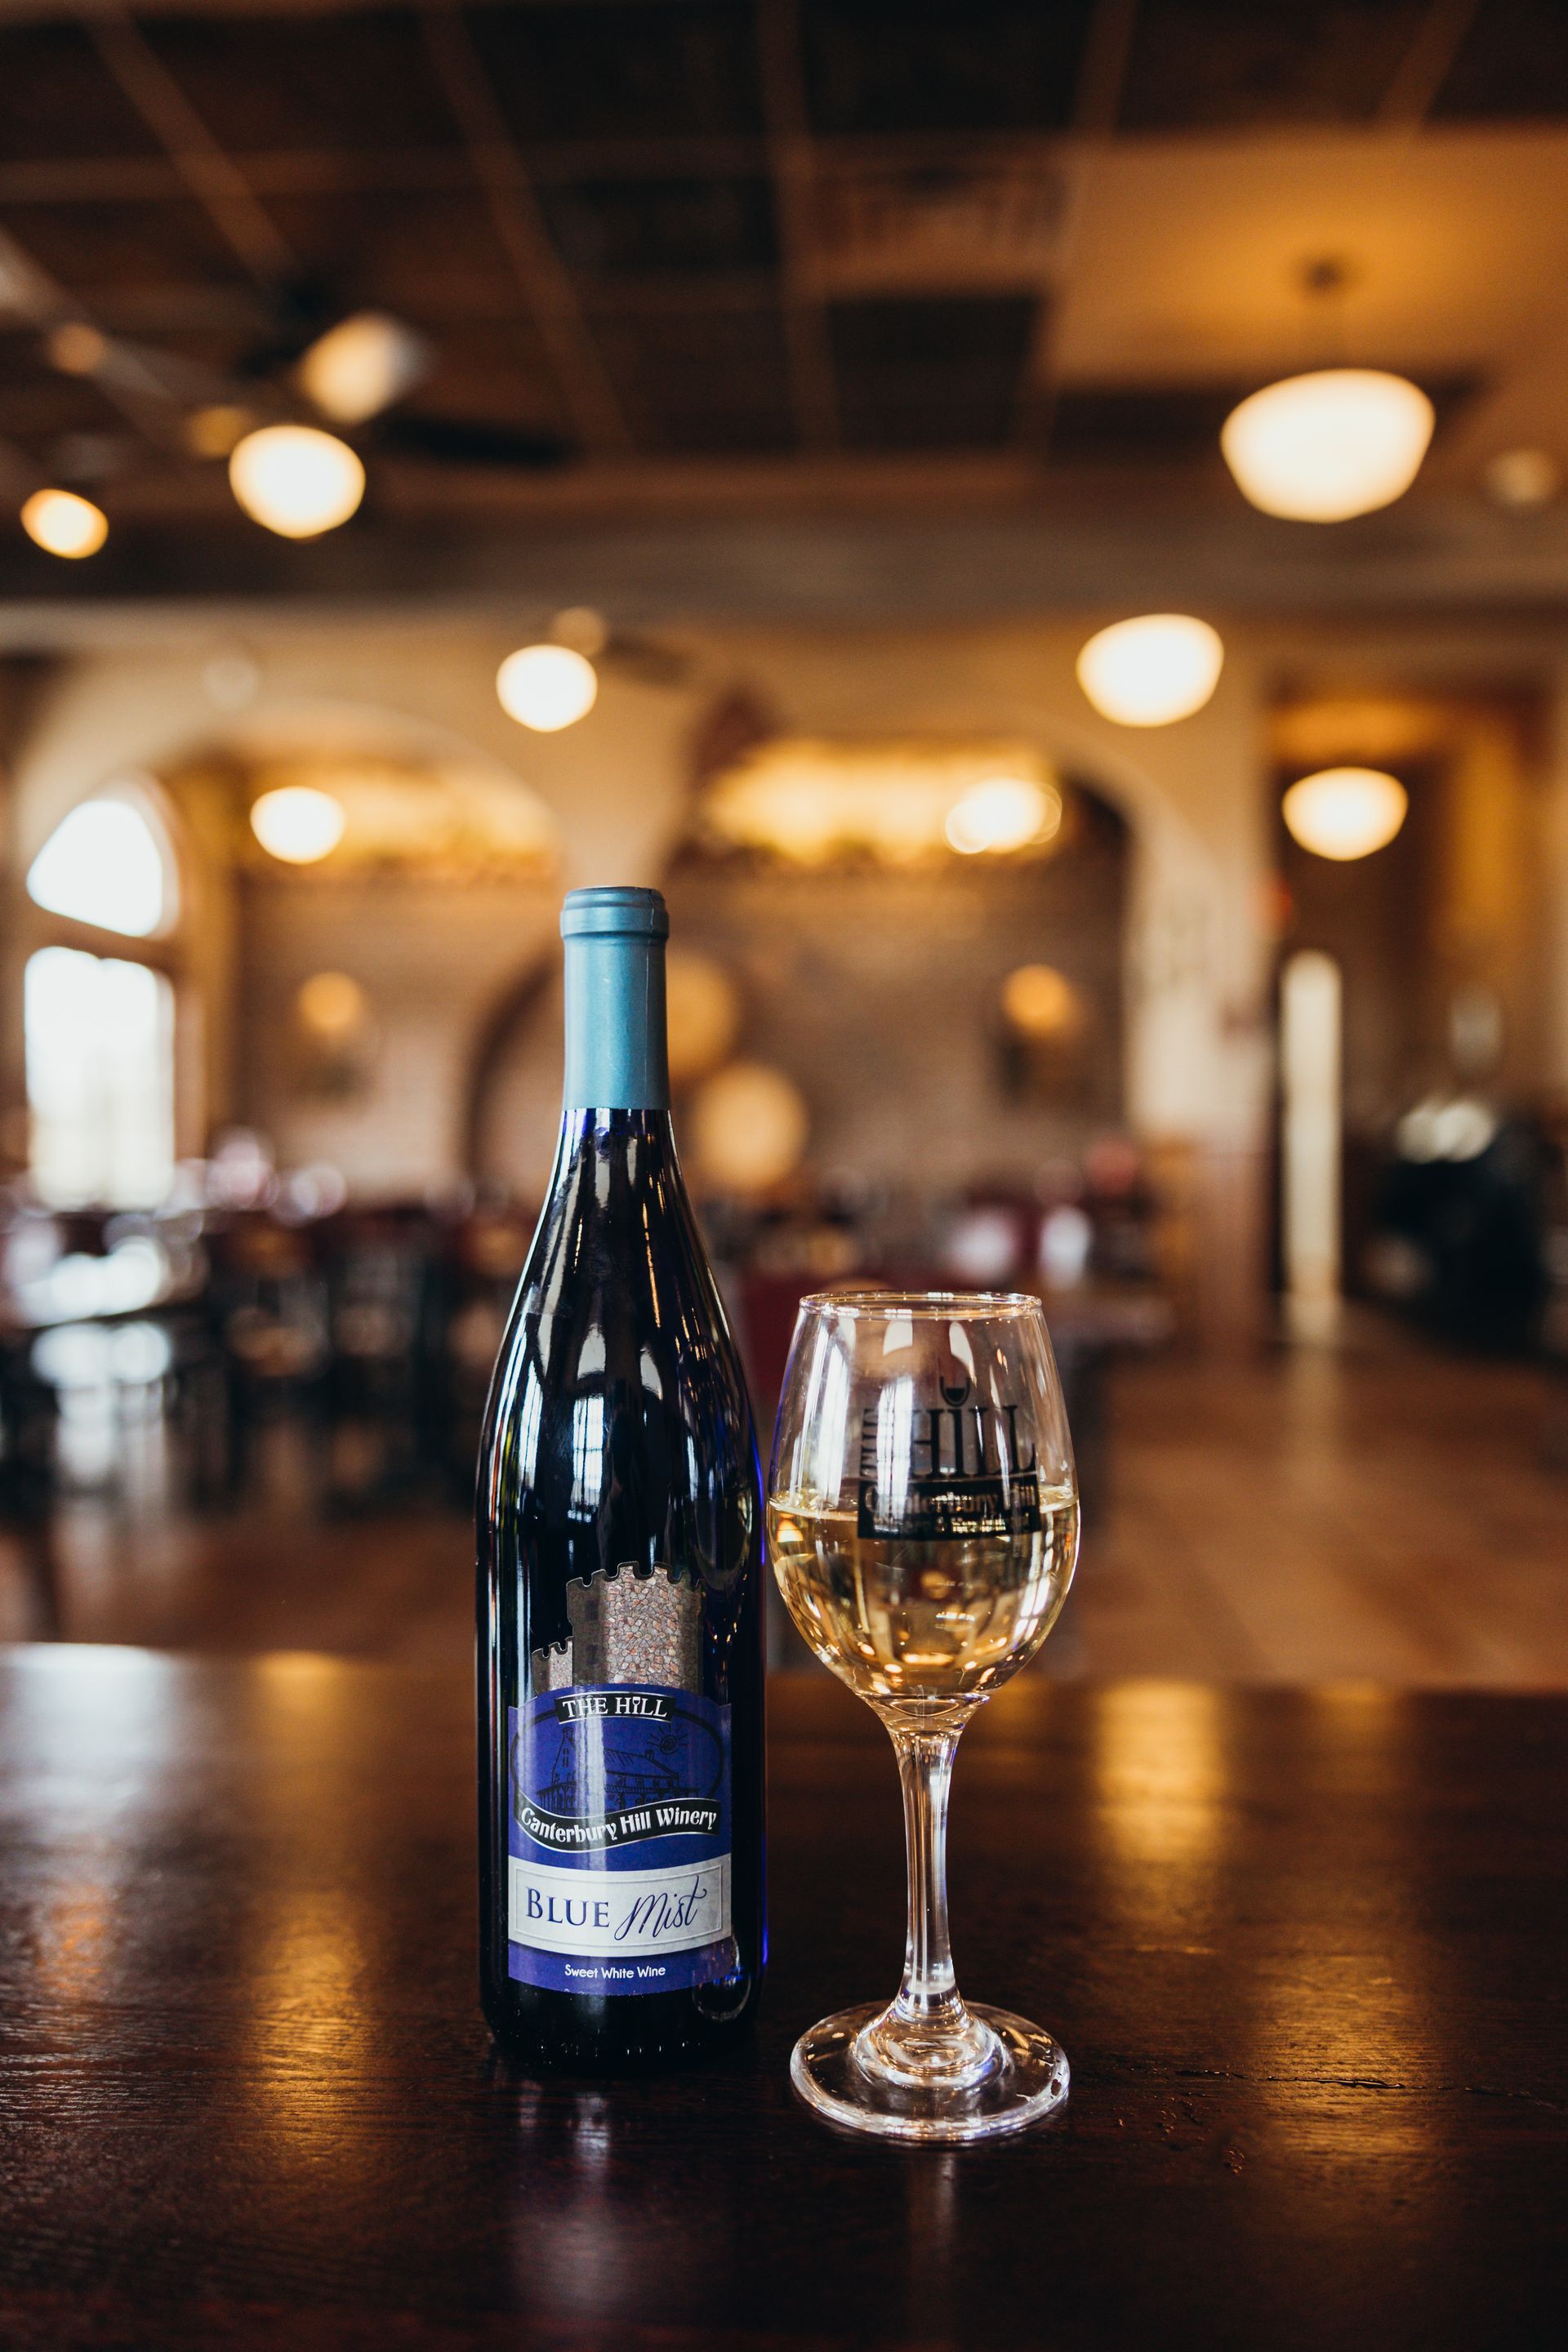 Our Blue Mist Wine Is One of Many Custom Crafted Wines Served at Special Events at the Hill.